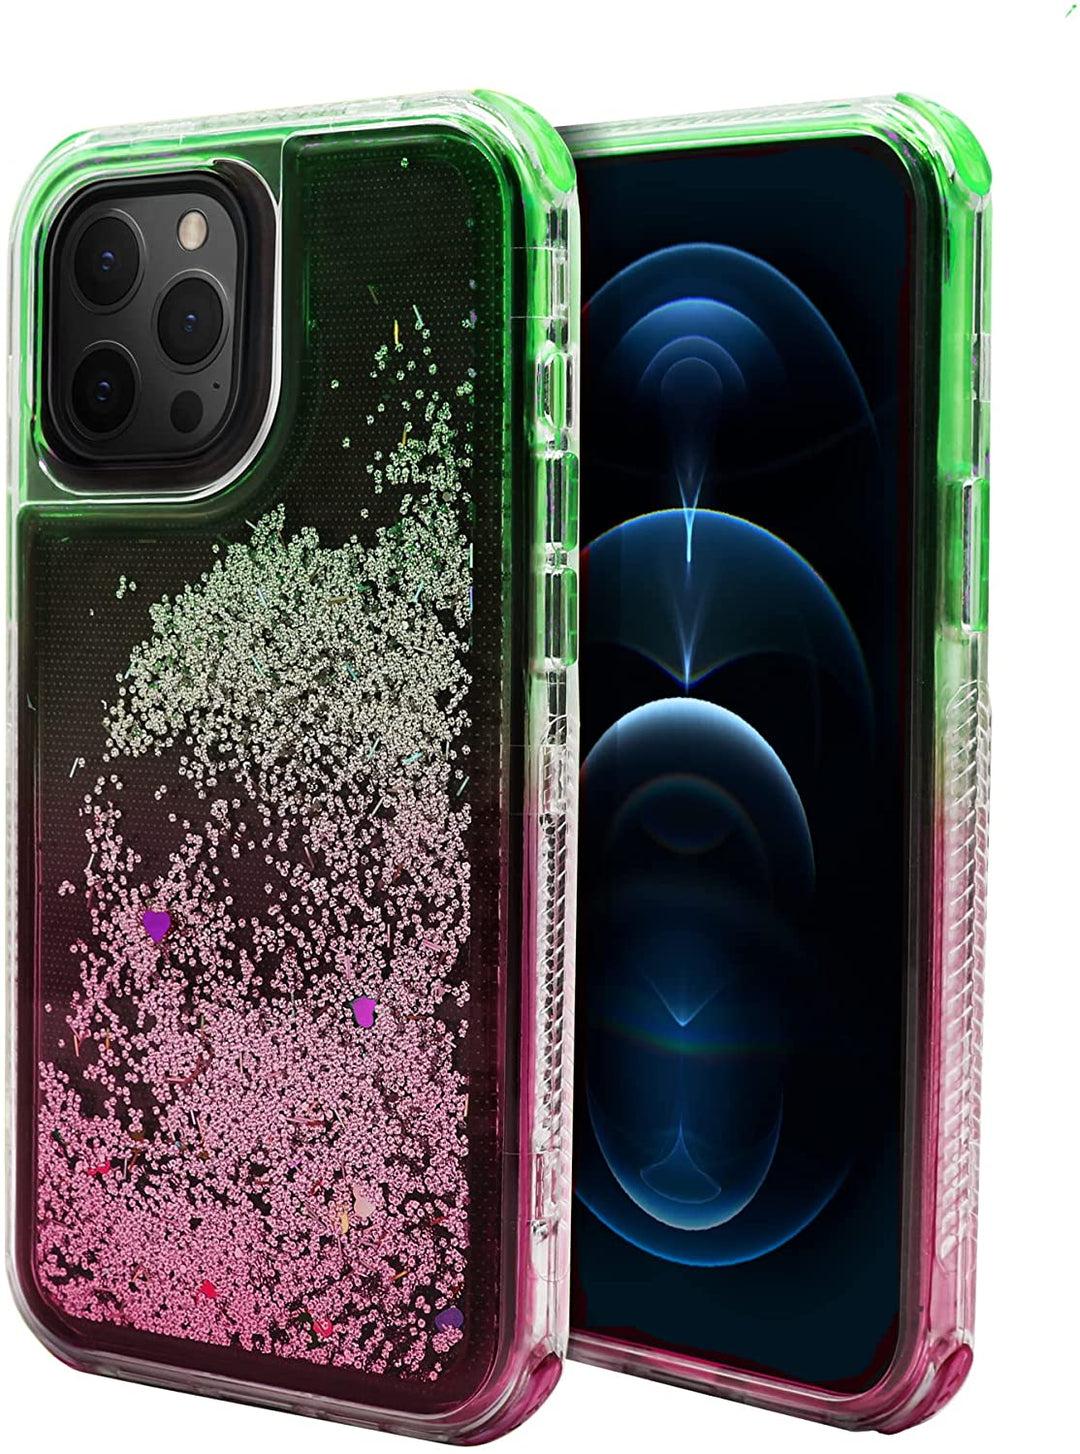 An iPhone 12 Pro Max case, with shifting-sand snow globe effect, and transitioning green-pink color gradients. #color_green-pink